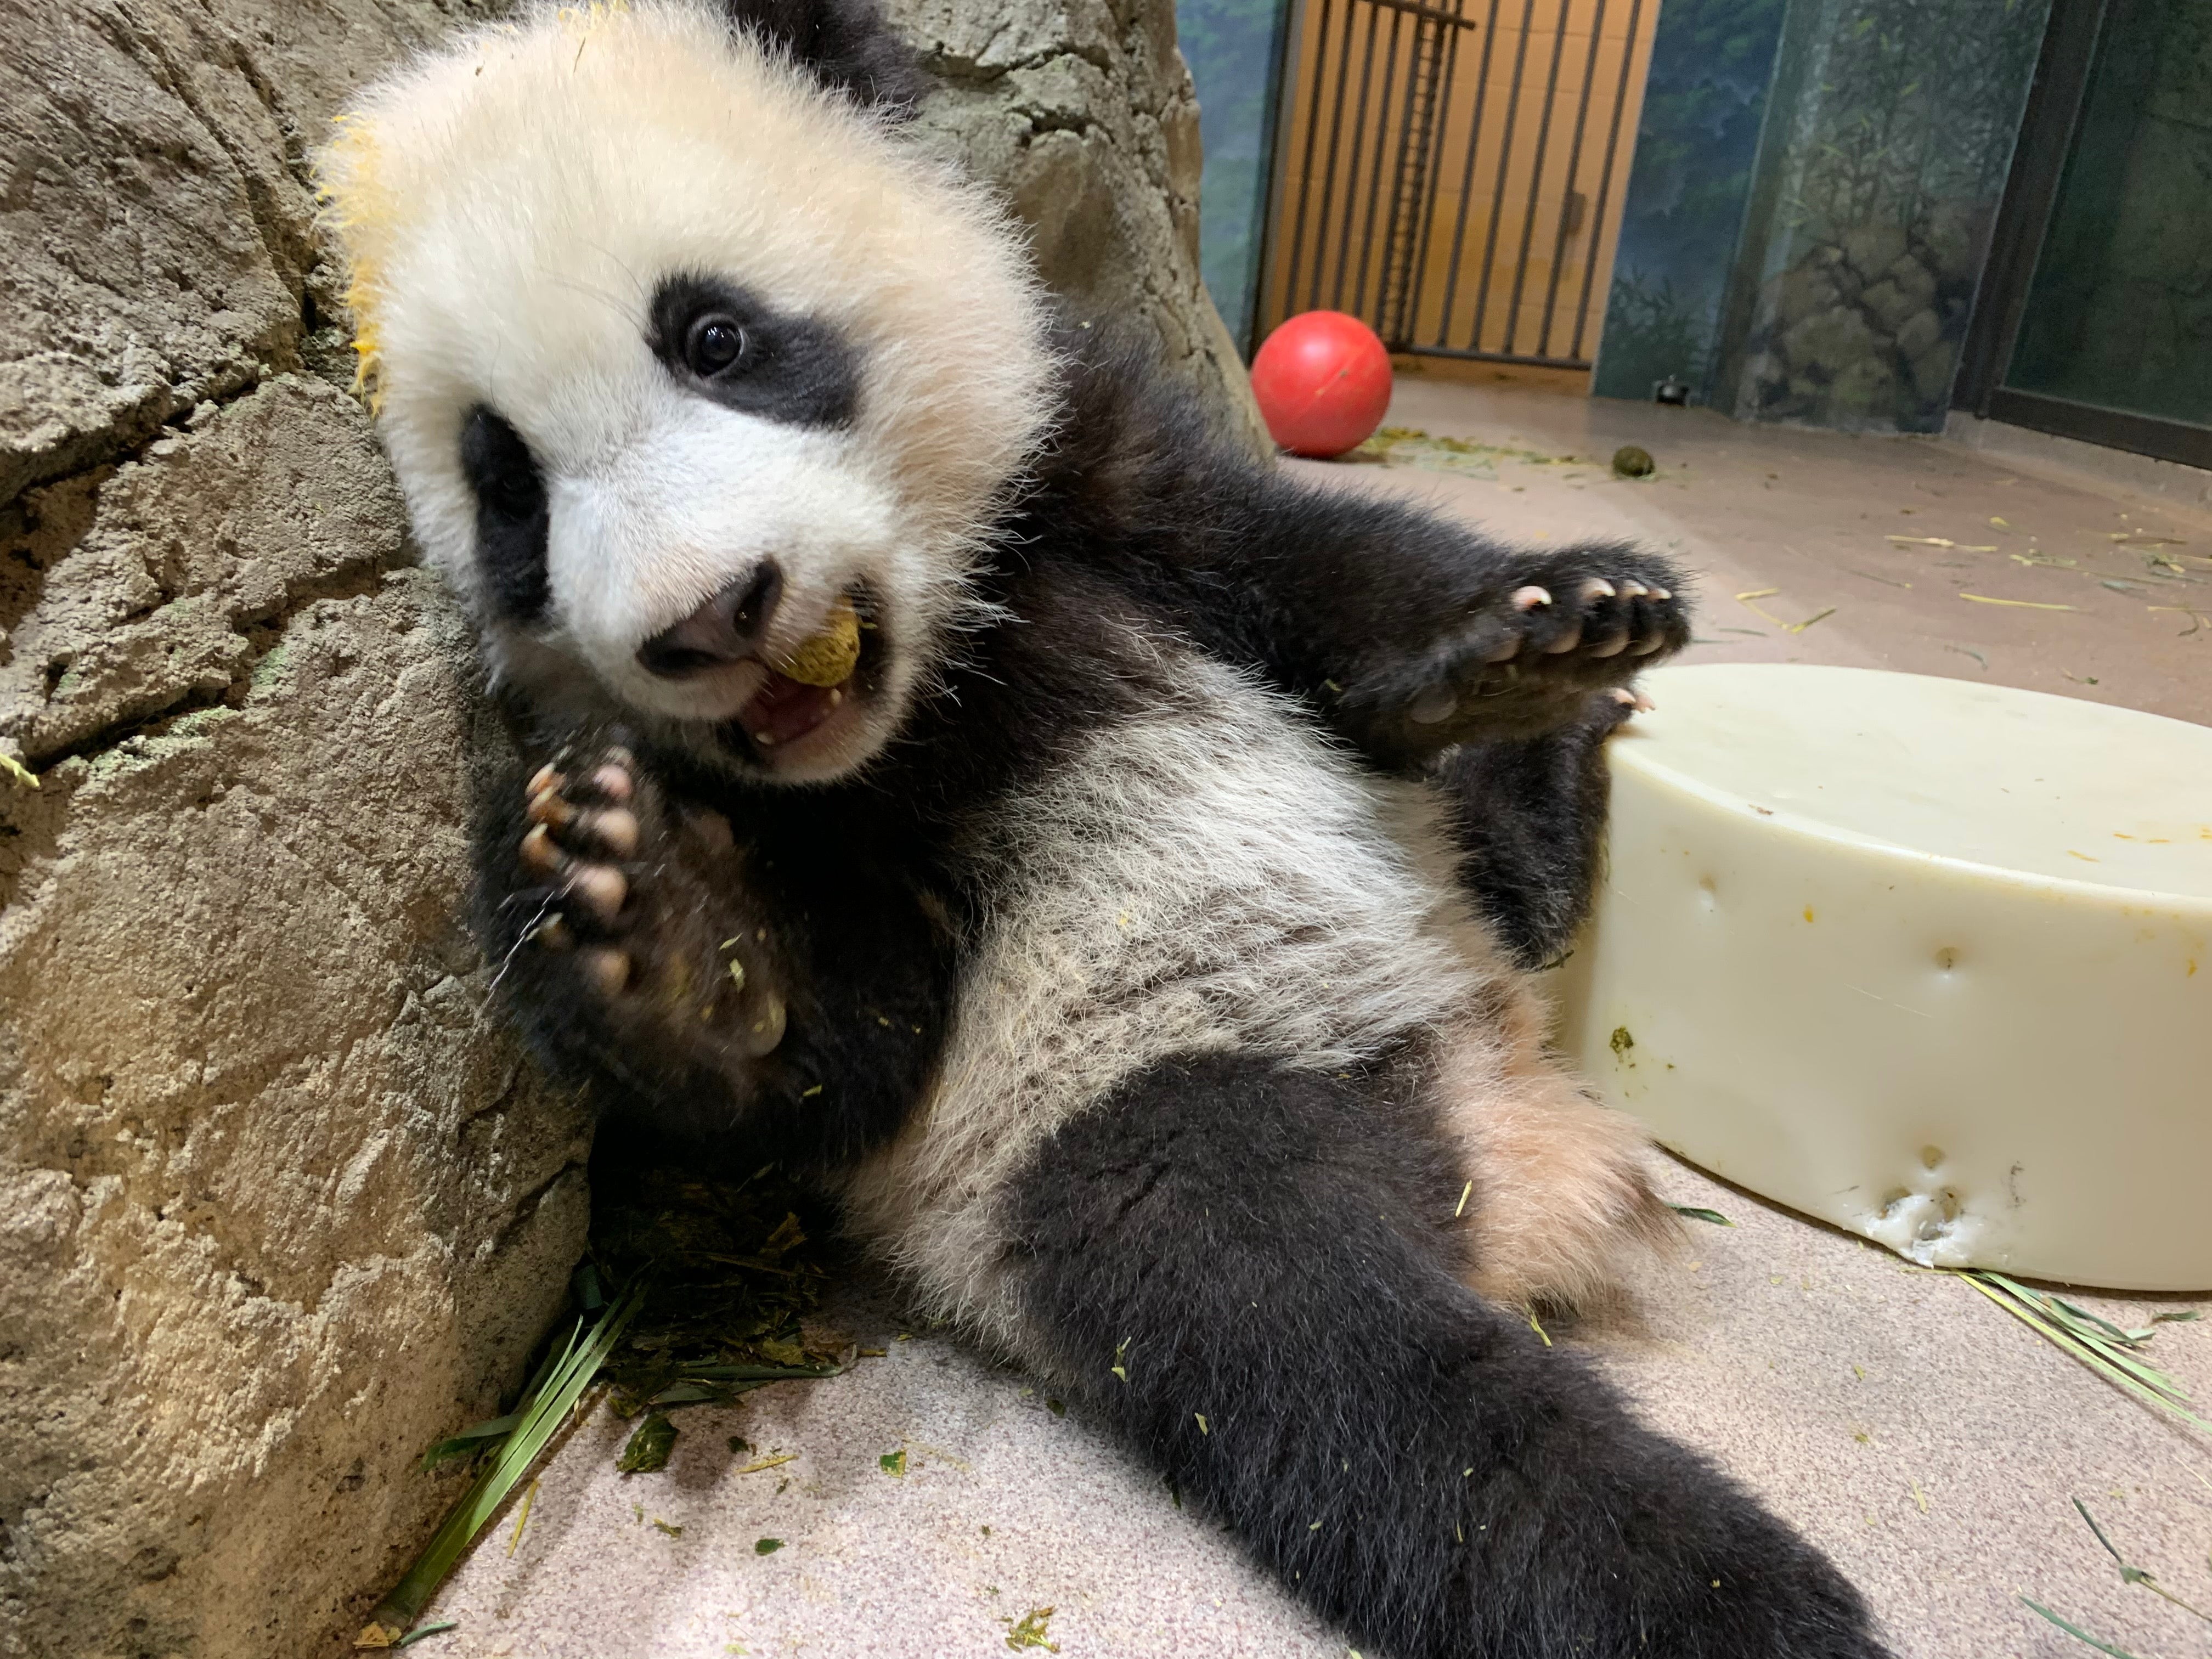 Five-month-old giant panda cub Xiao Qi Ji leans against rockwork in his habitat with one paw up on a cylindrical-shaped enrichment toy and nibbles on his first biscuit.